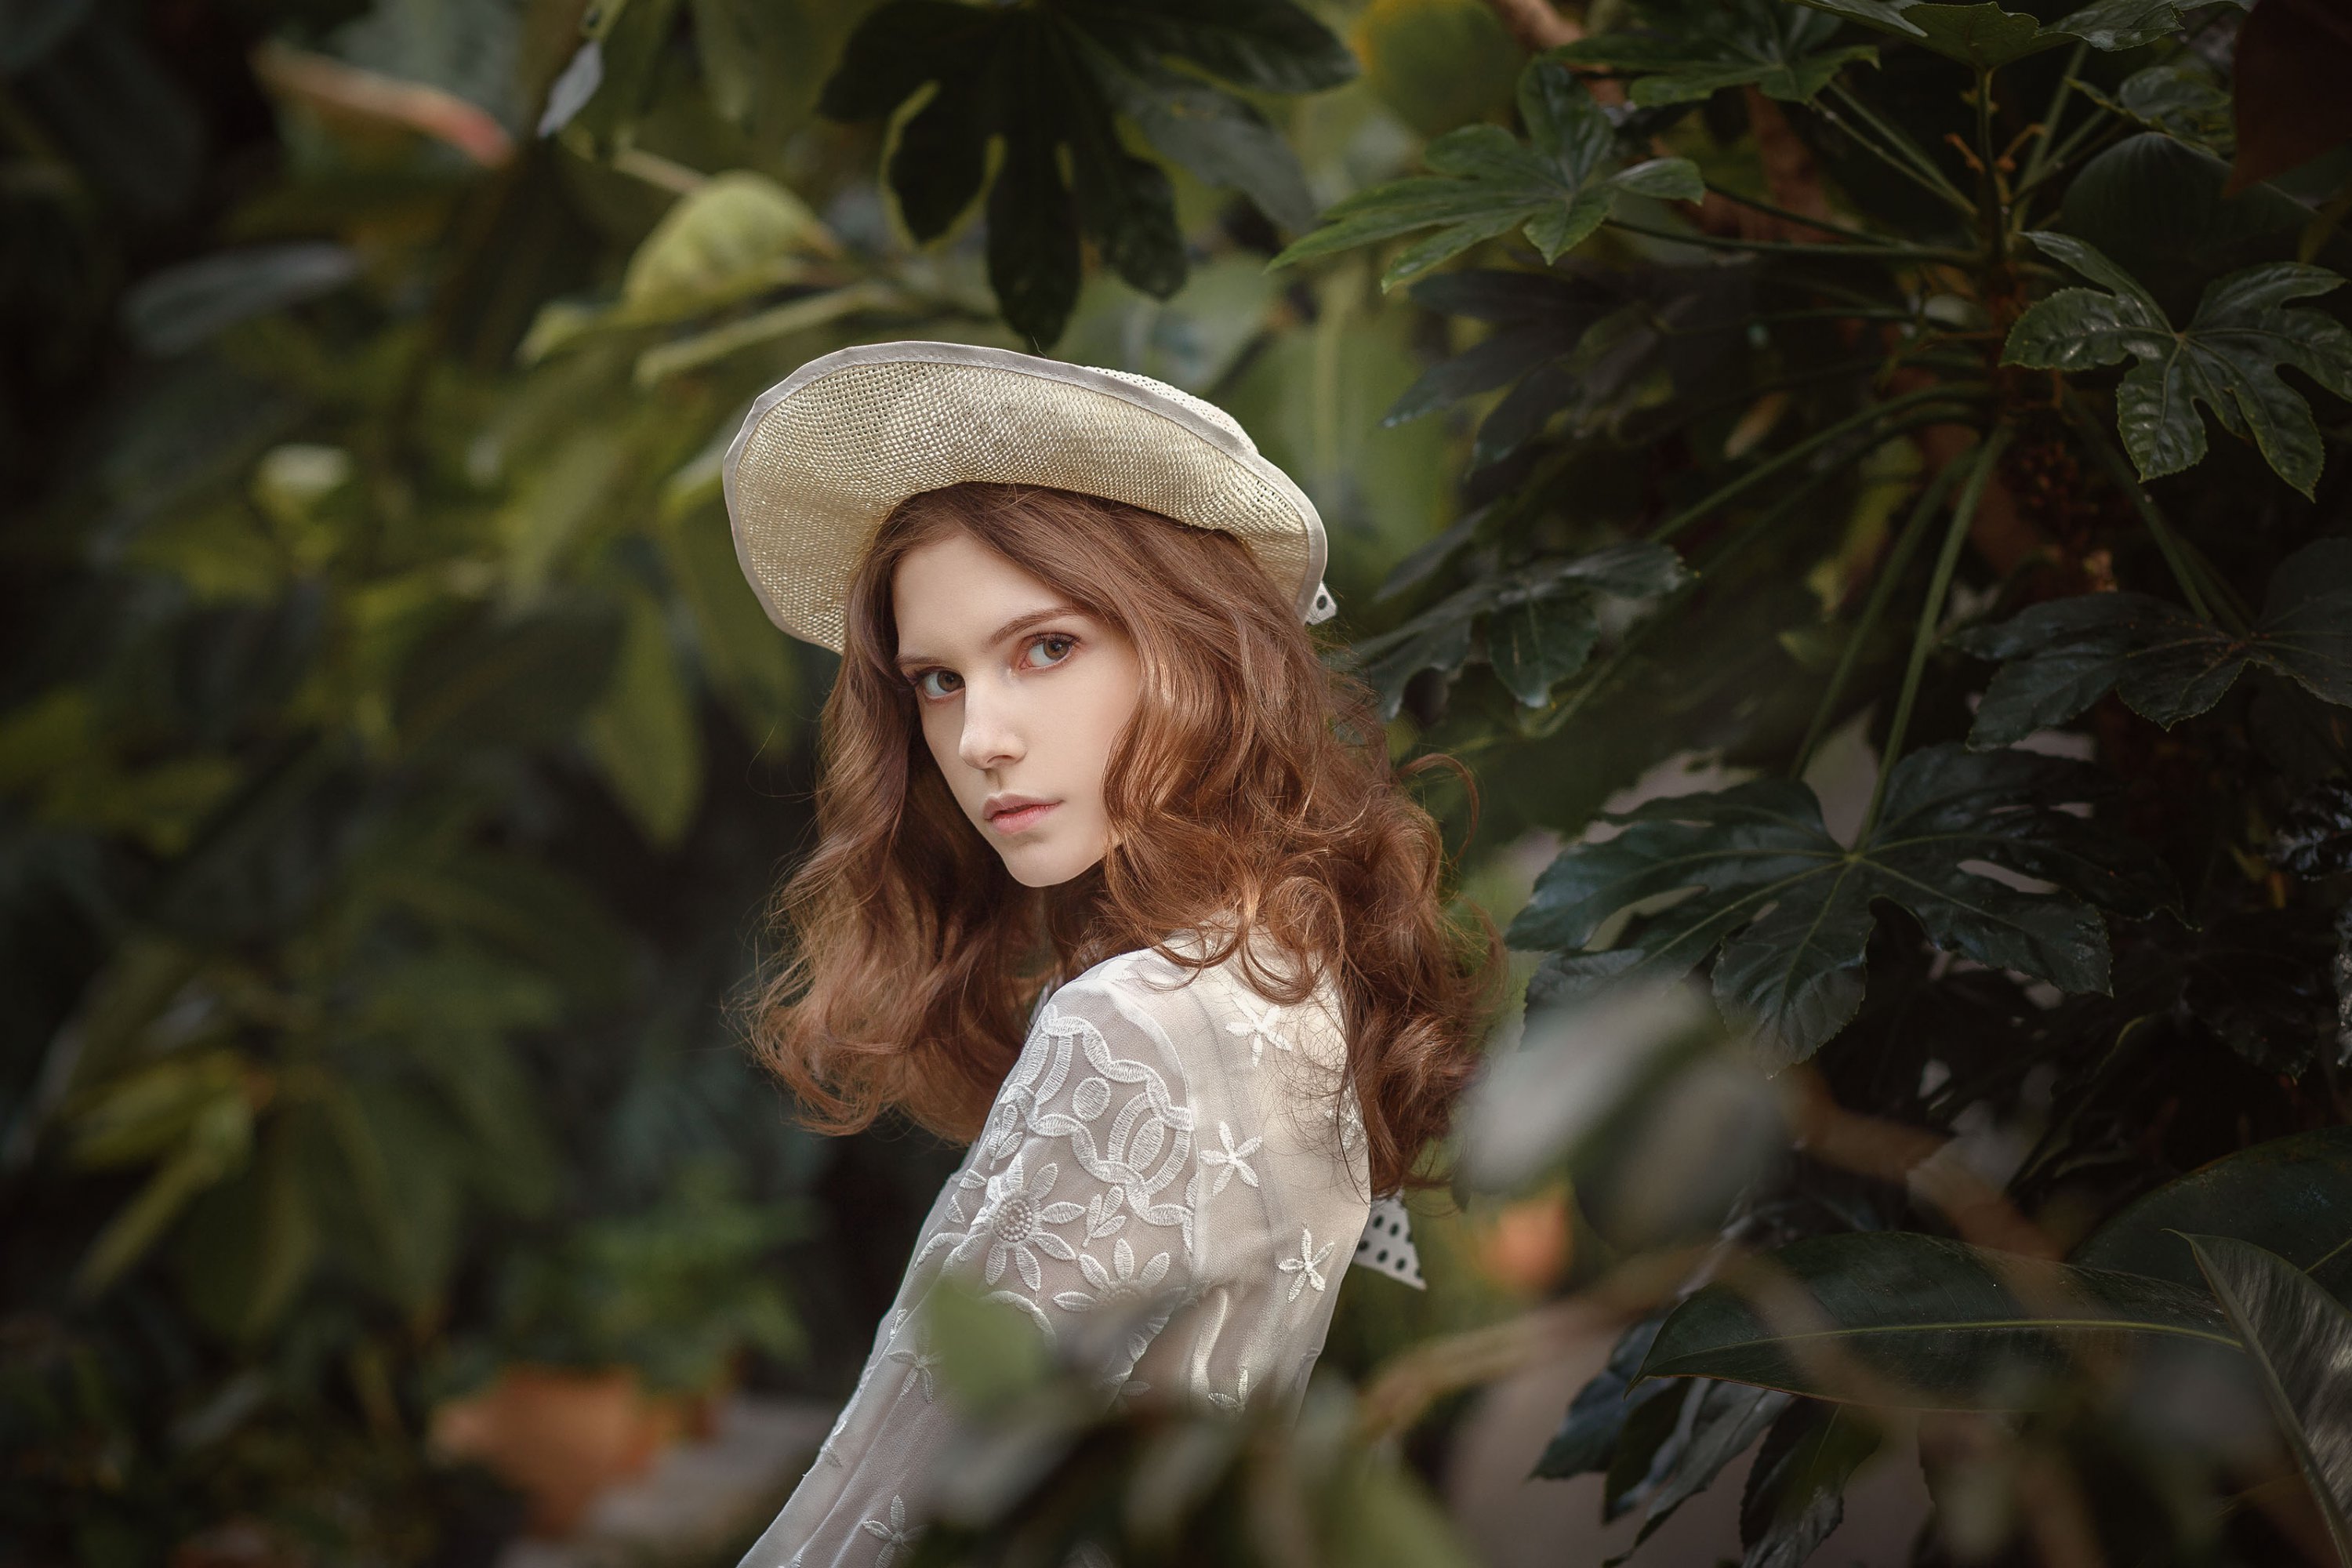 Women Redhead Model Long Hair Leaves Nature Women Outdoors Hat Dress White Dress Curly Hair Brown Ey 3000x2000